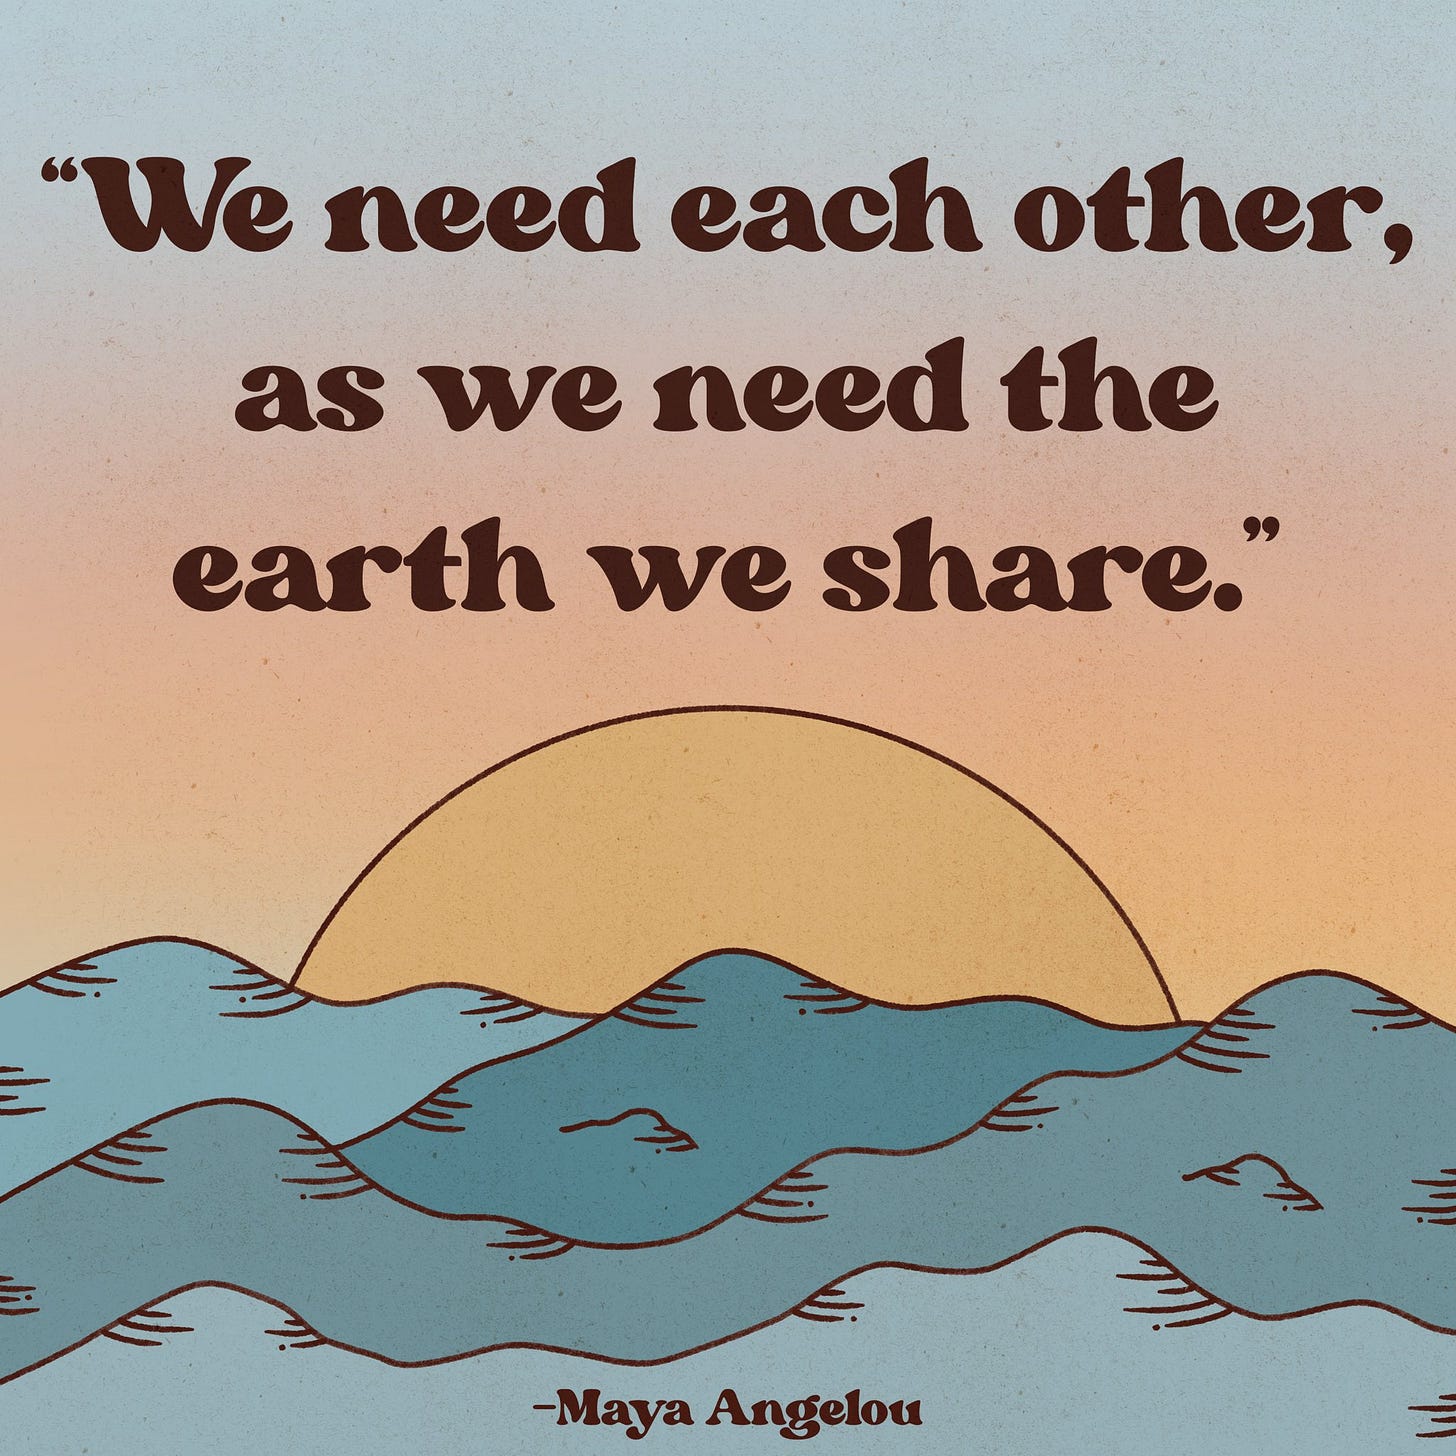 a graphic of the sun on blue water with the words "we need each other, as we need the earth we share. -Maya Angelou"